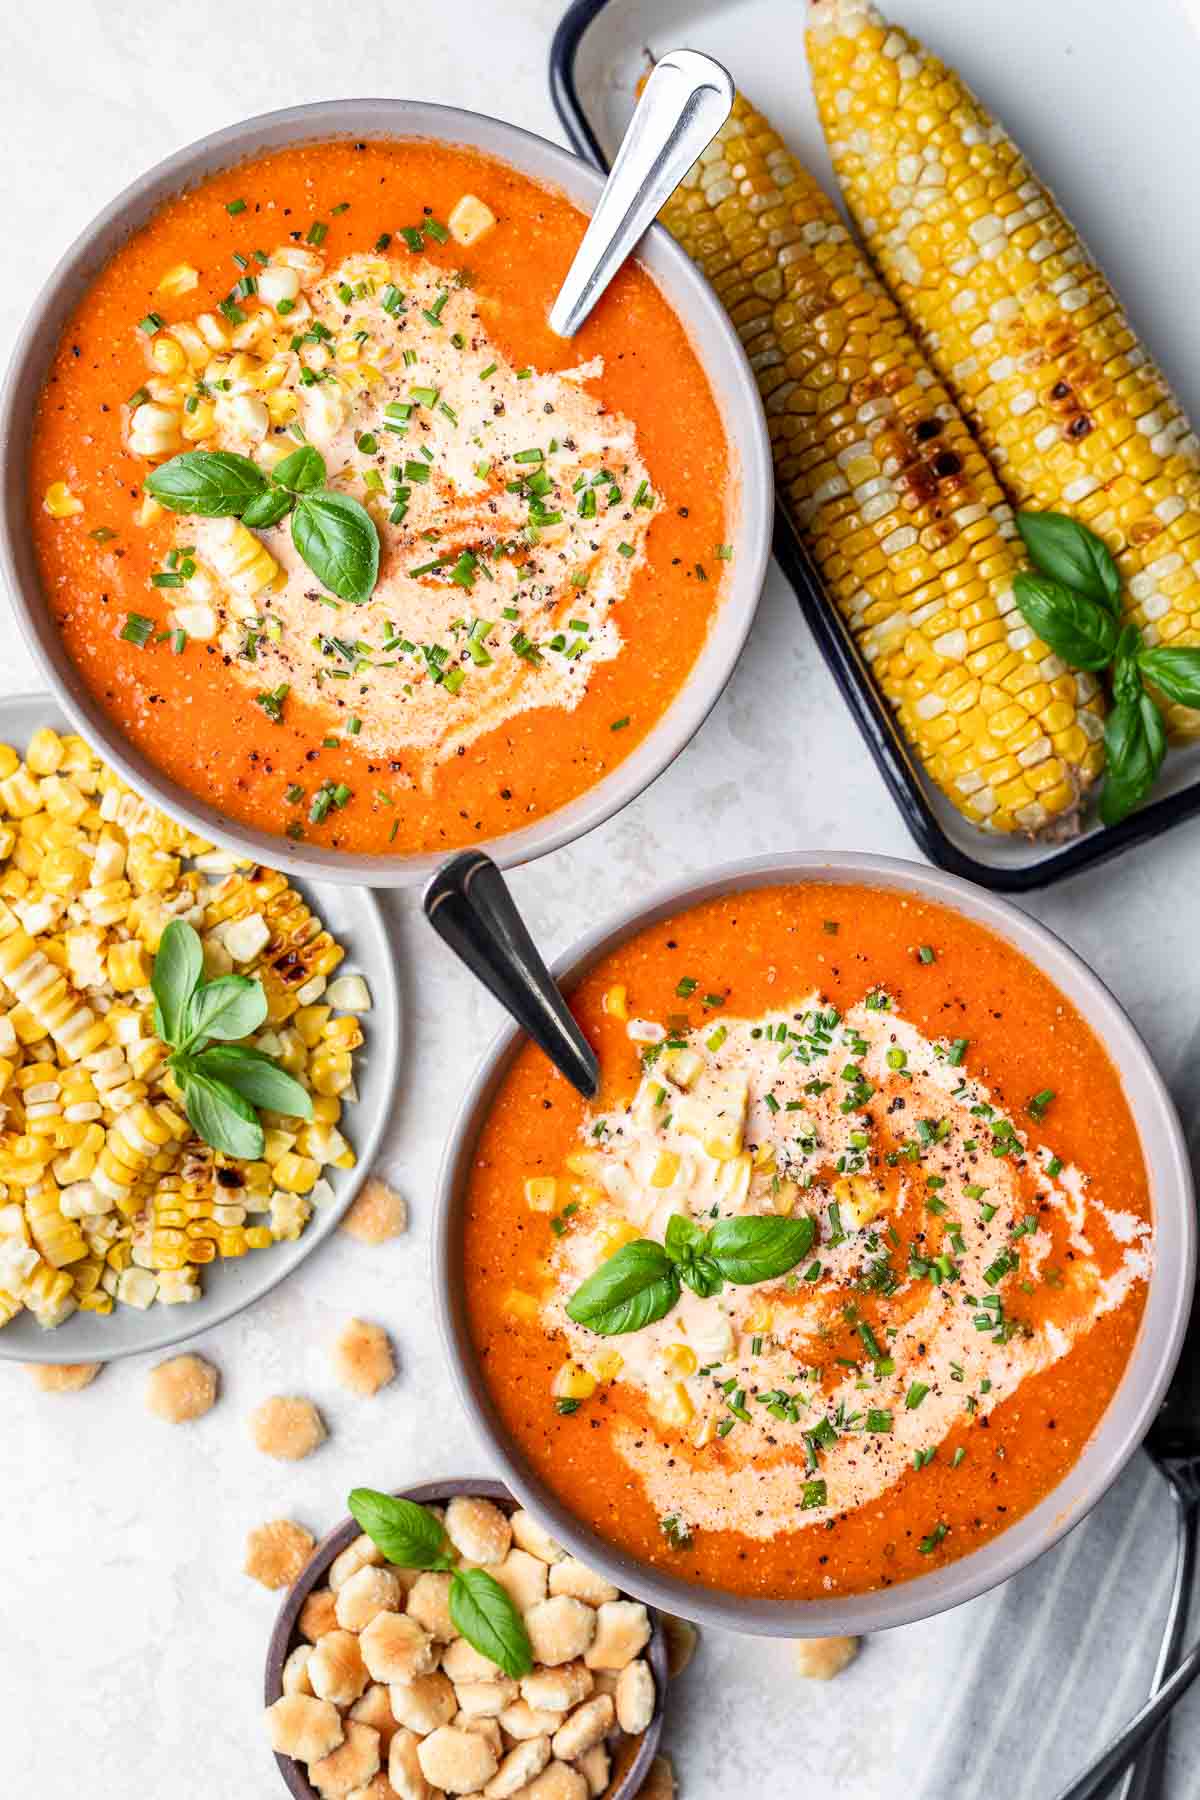 tomato and sweet corn soup in two bowls.